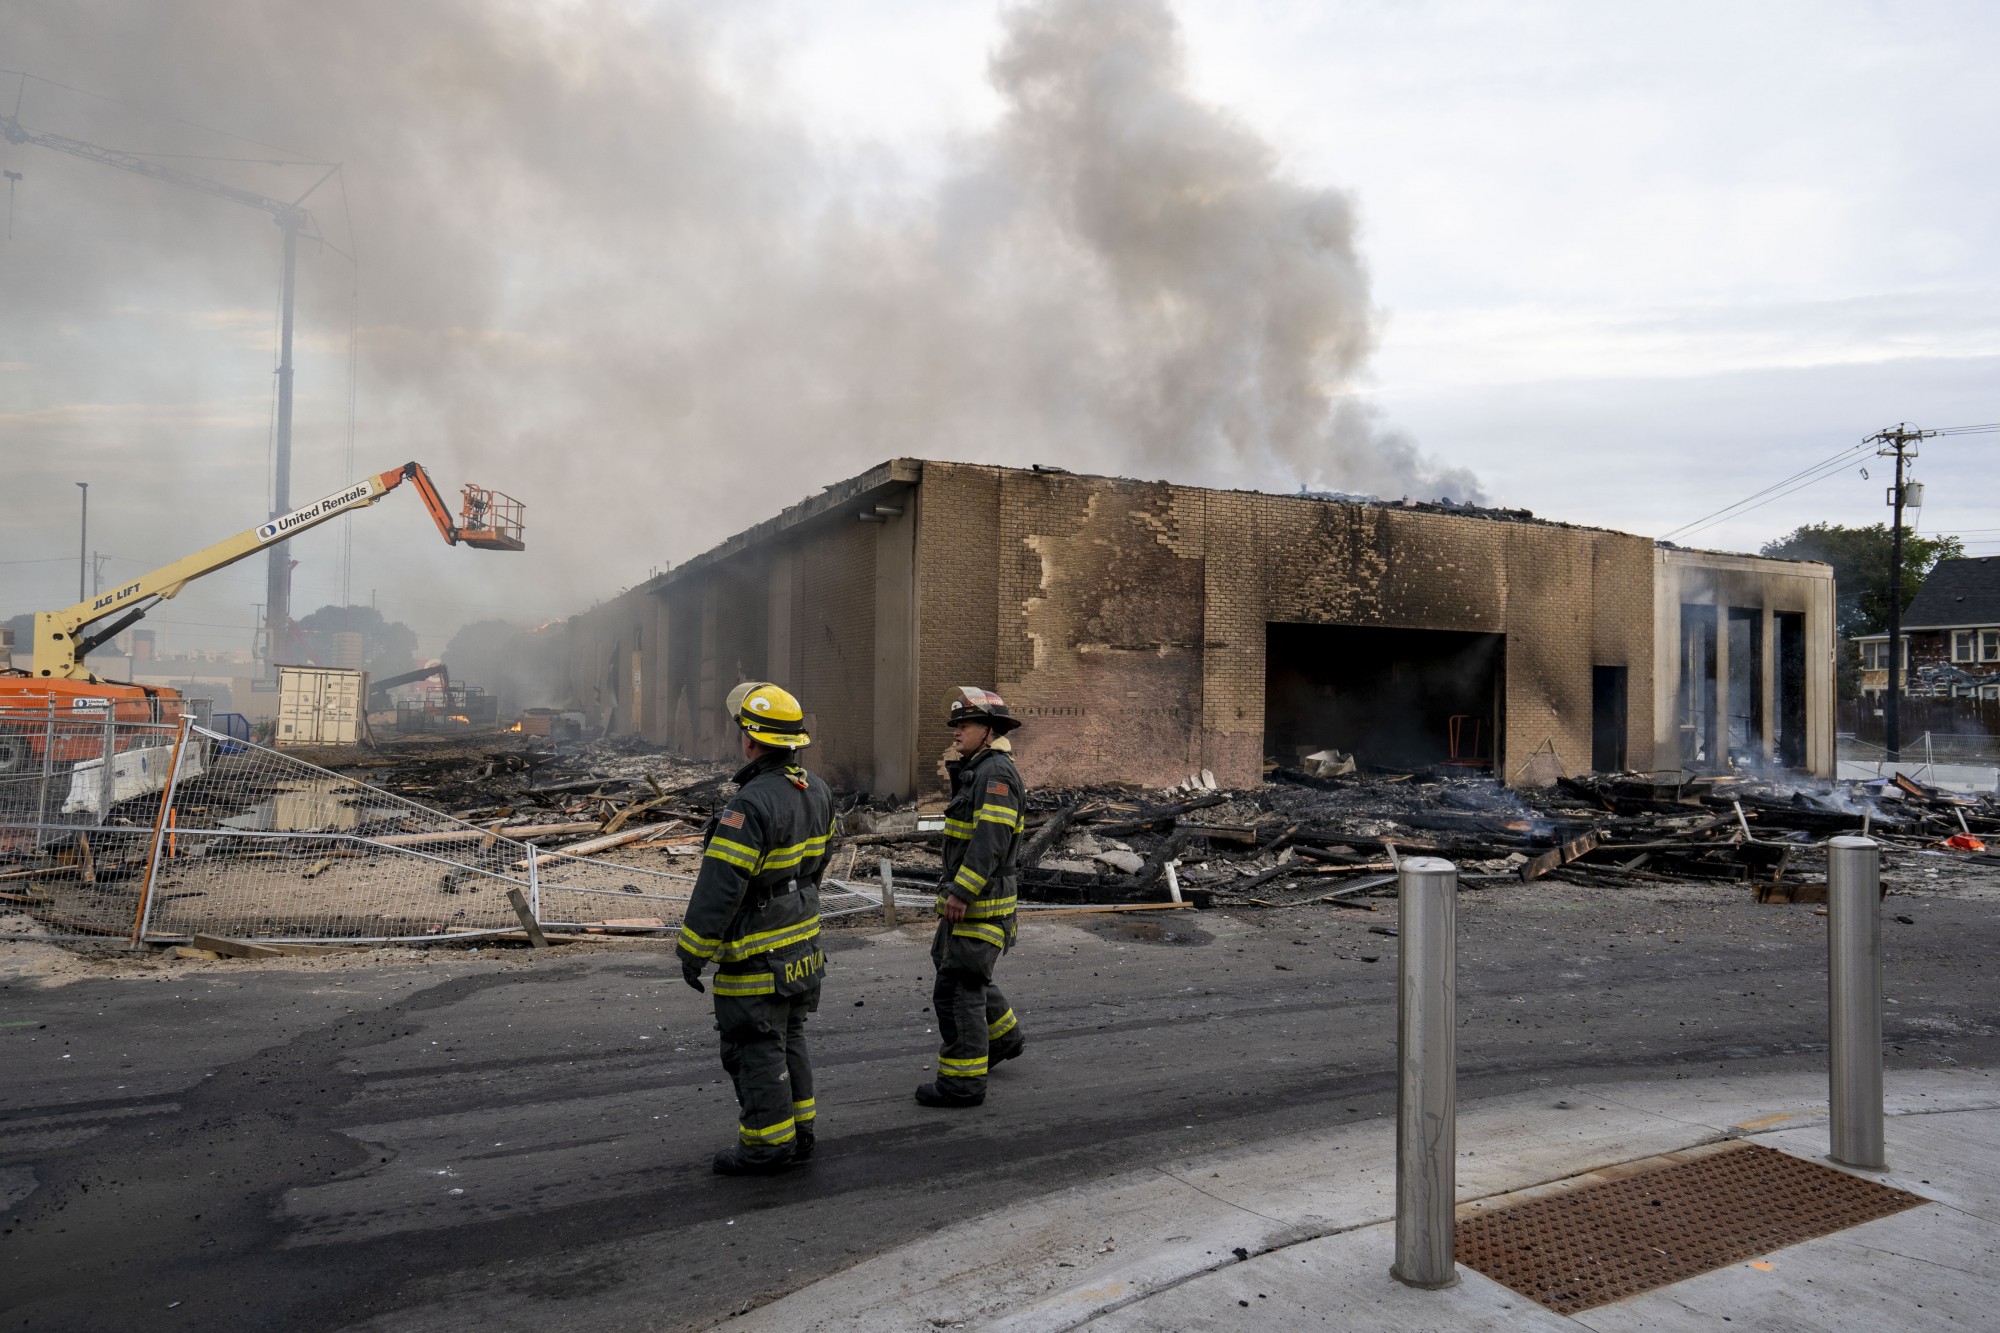 Minneapolis firefighters observe damage the morning after a second night of protests that turned violent near the Minneapolis Police 3rd Precinct on Thursday, May 28. 